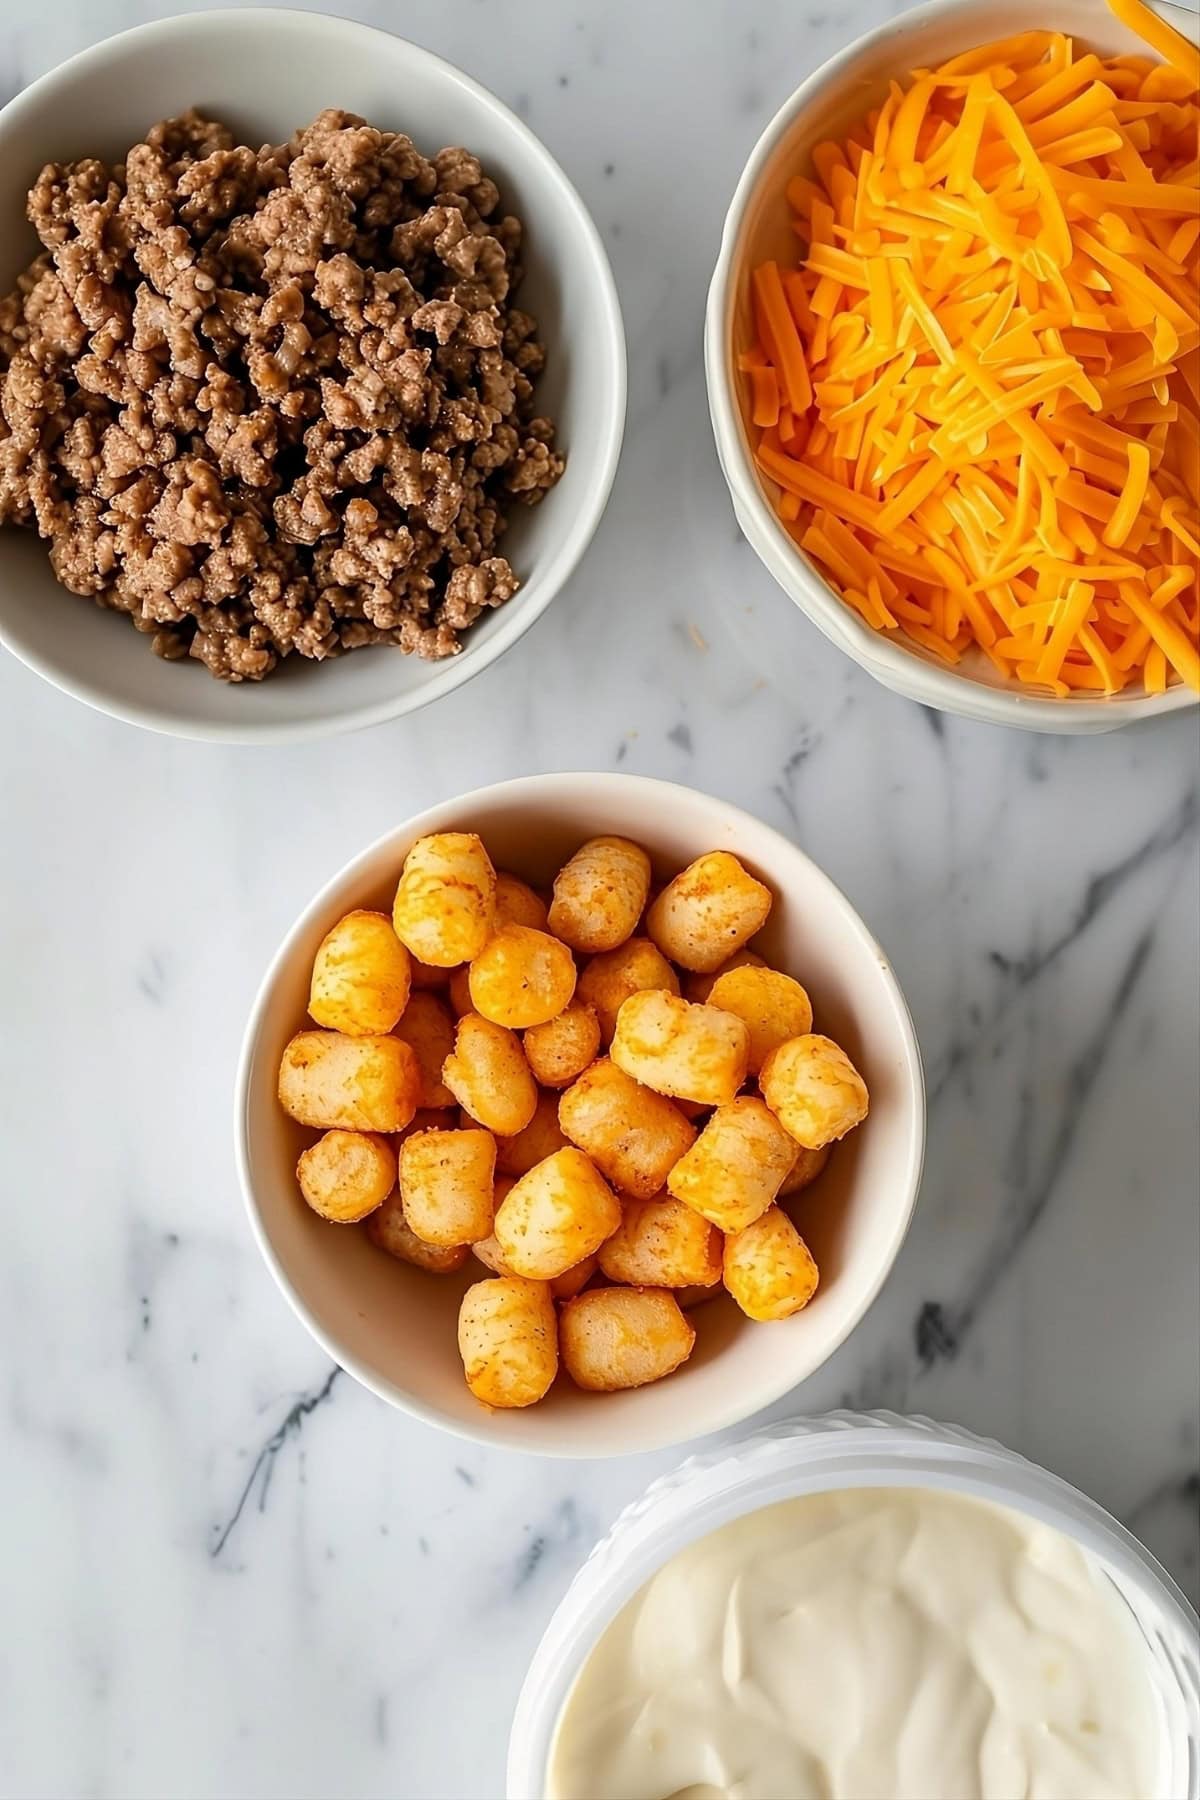 Ground beef, cheddar cheese, tater tots and dressing in bowl.